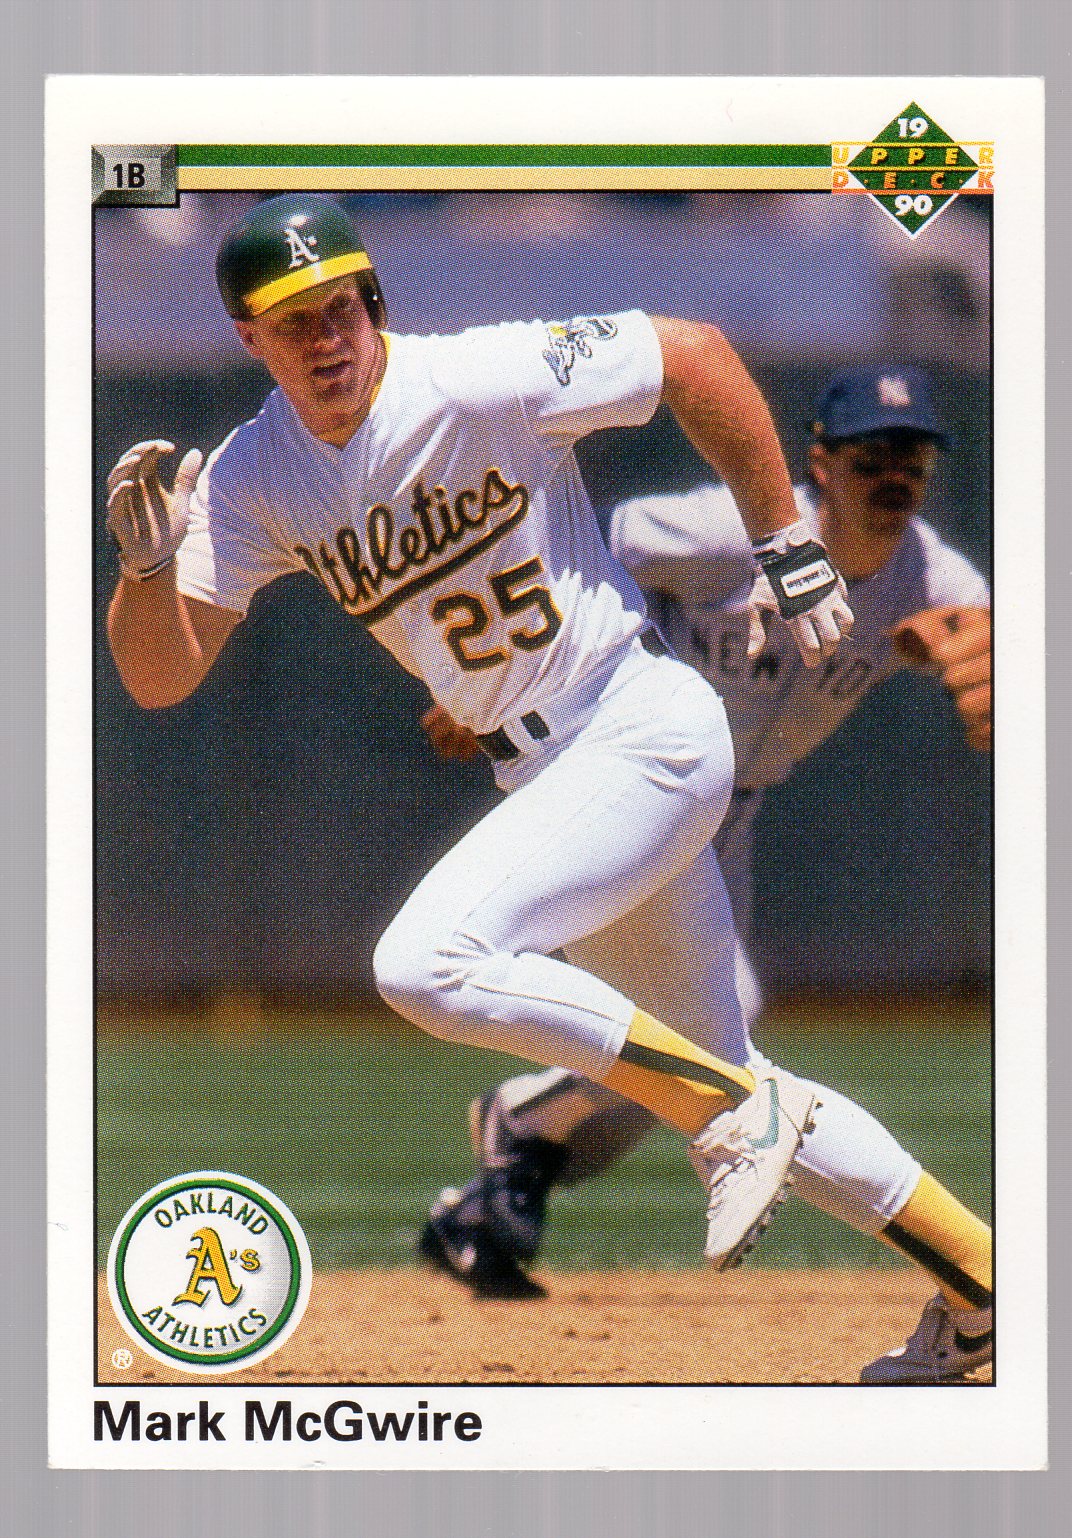 1990 Upper Deck #171 Mark McGwire UER/Total games 427 and/hits 479 should be/467 and 427